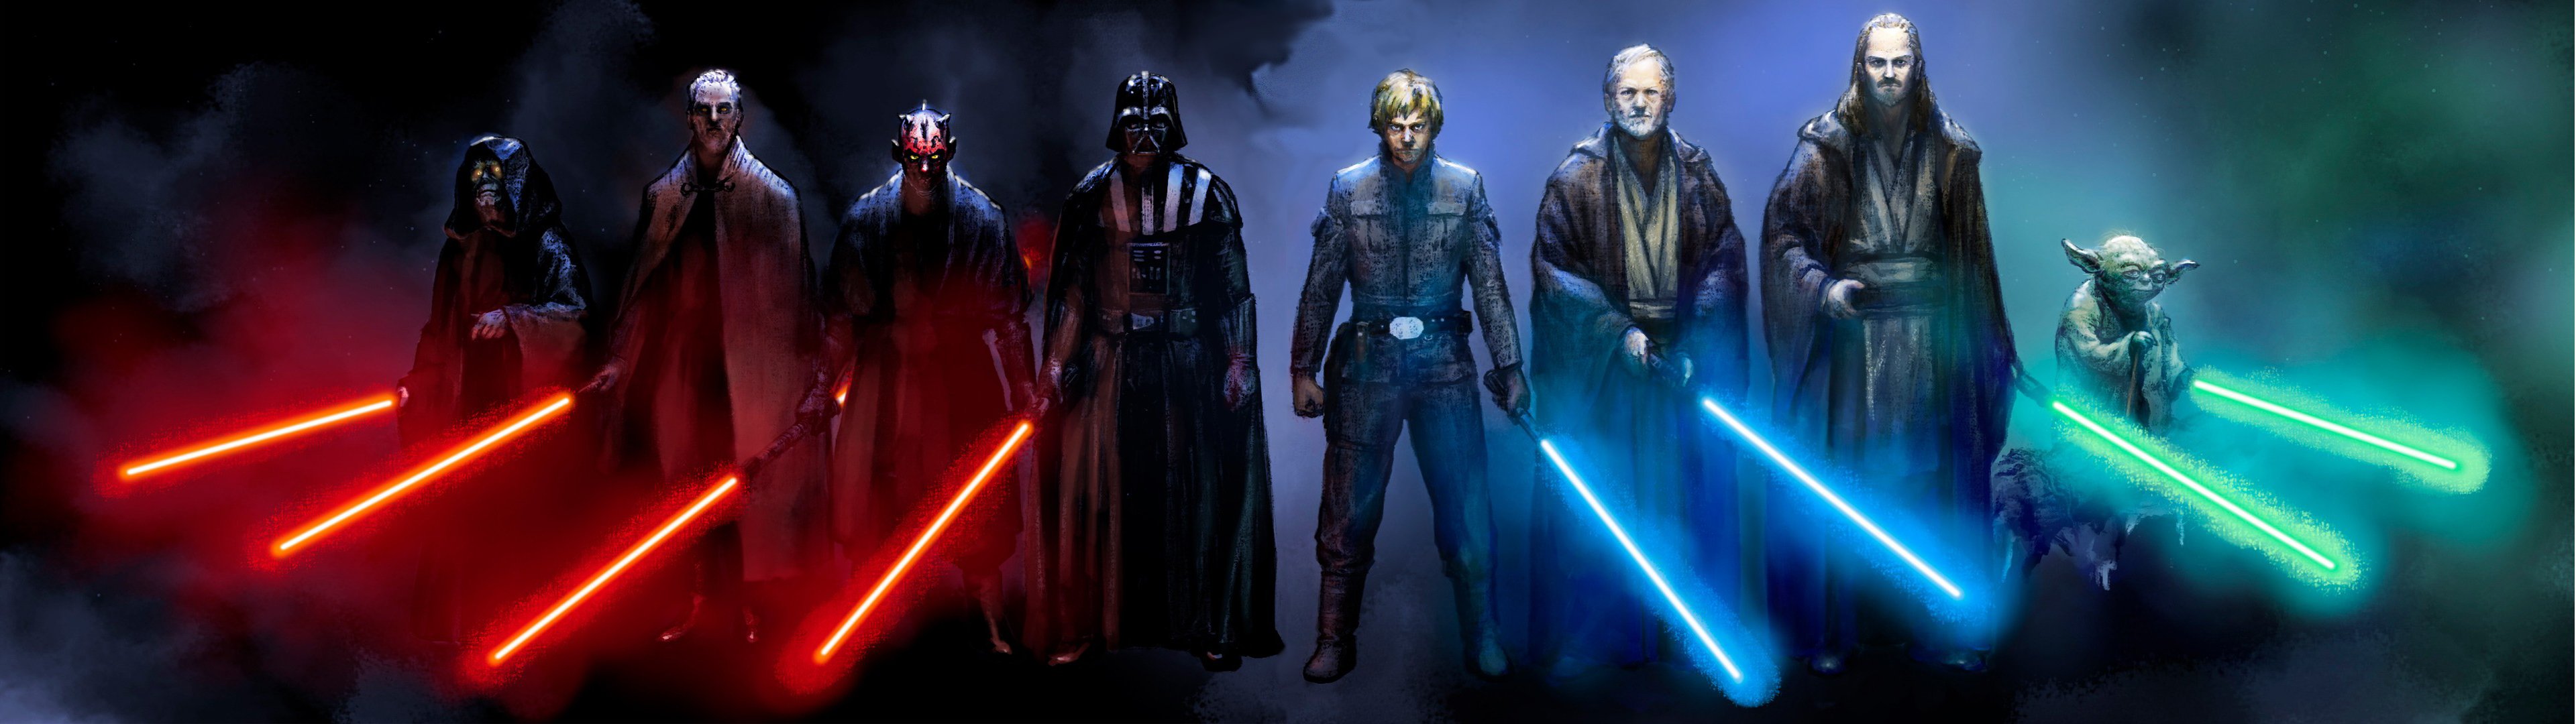 sith lords and the jedi knights by loki odin customization wallpaper